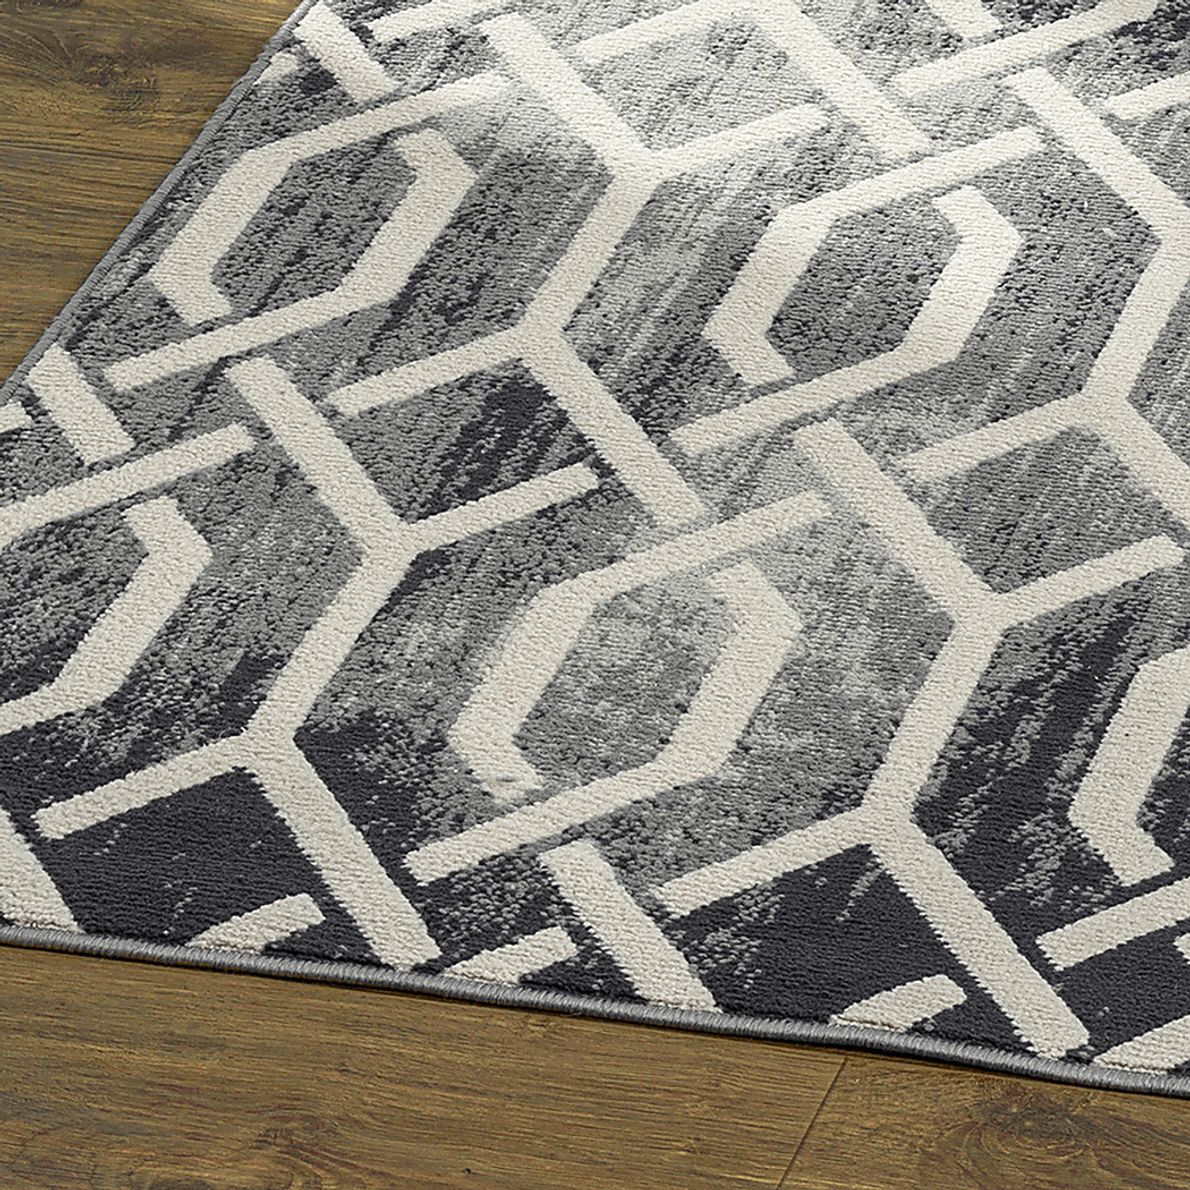 Gainswood Gray 5' x 7' Rug